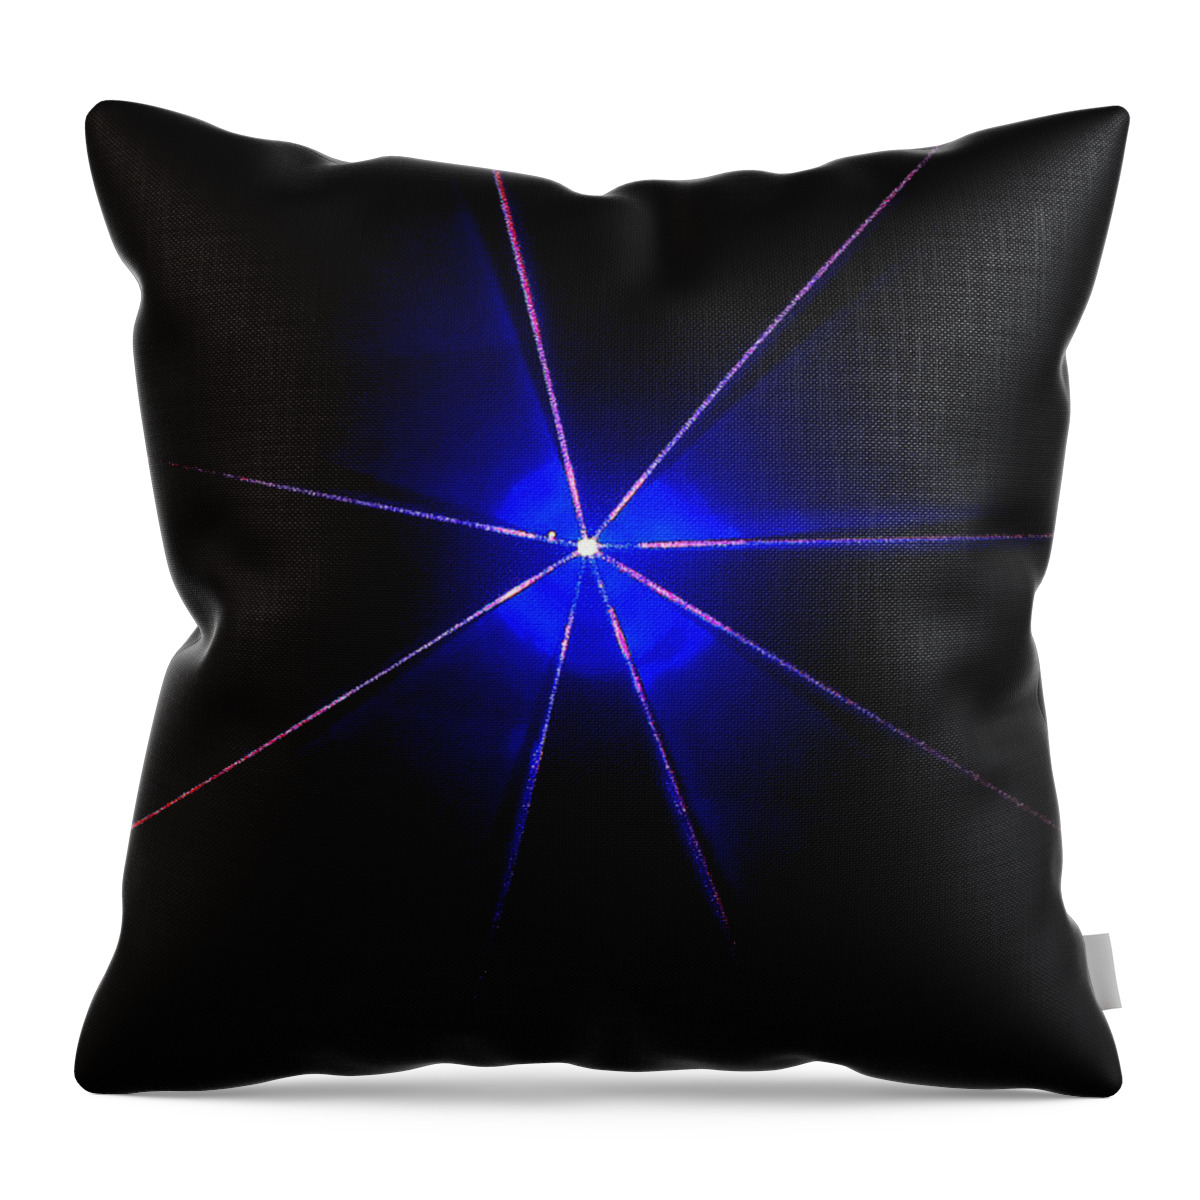 #abstracts #acrylic #artgallery # #artist #artnews # #artwork # #callforart #callforentries #colour #creative # #paint #painting #paintings #photograph #photography #photoshoot #photoshop #photoshopped Throw Pillow featuring the digital art Laserworld Part 8 by The Lovelock experience